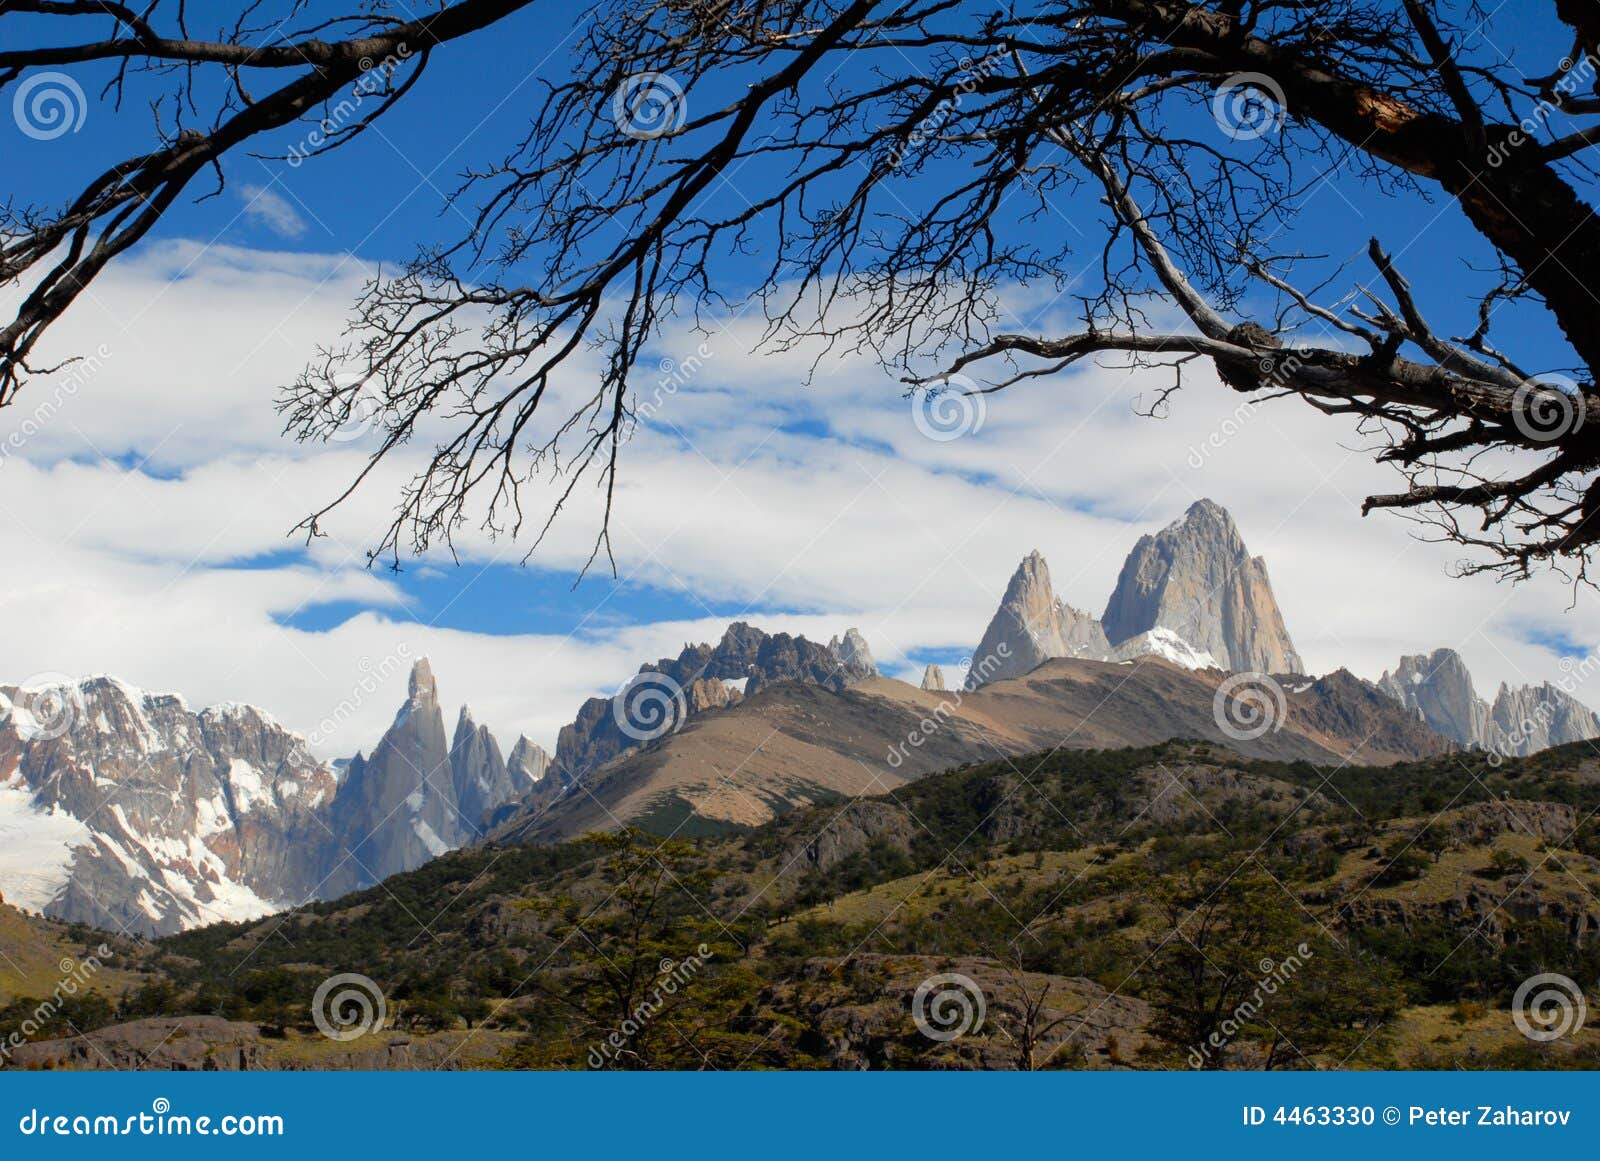 mountains fitz roy and cerro torre